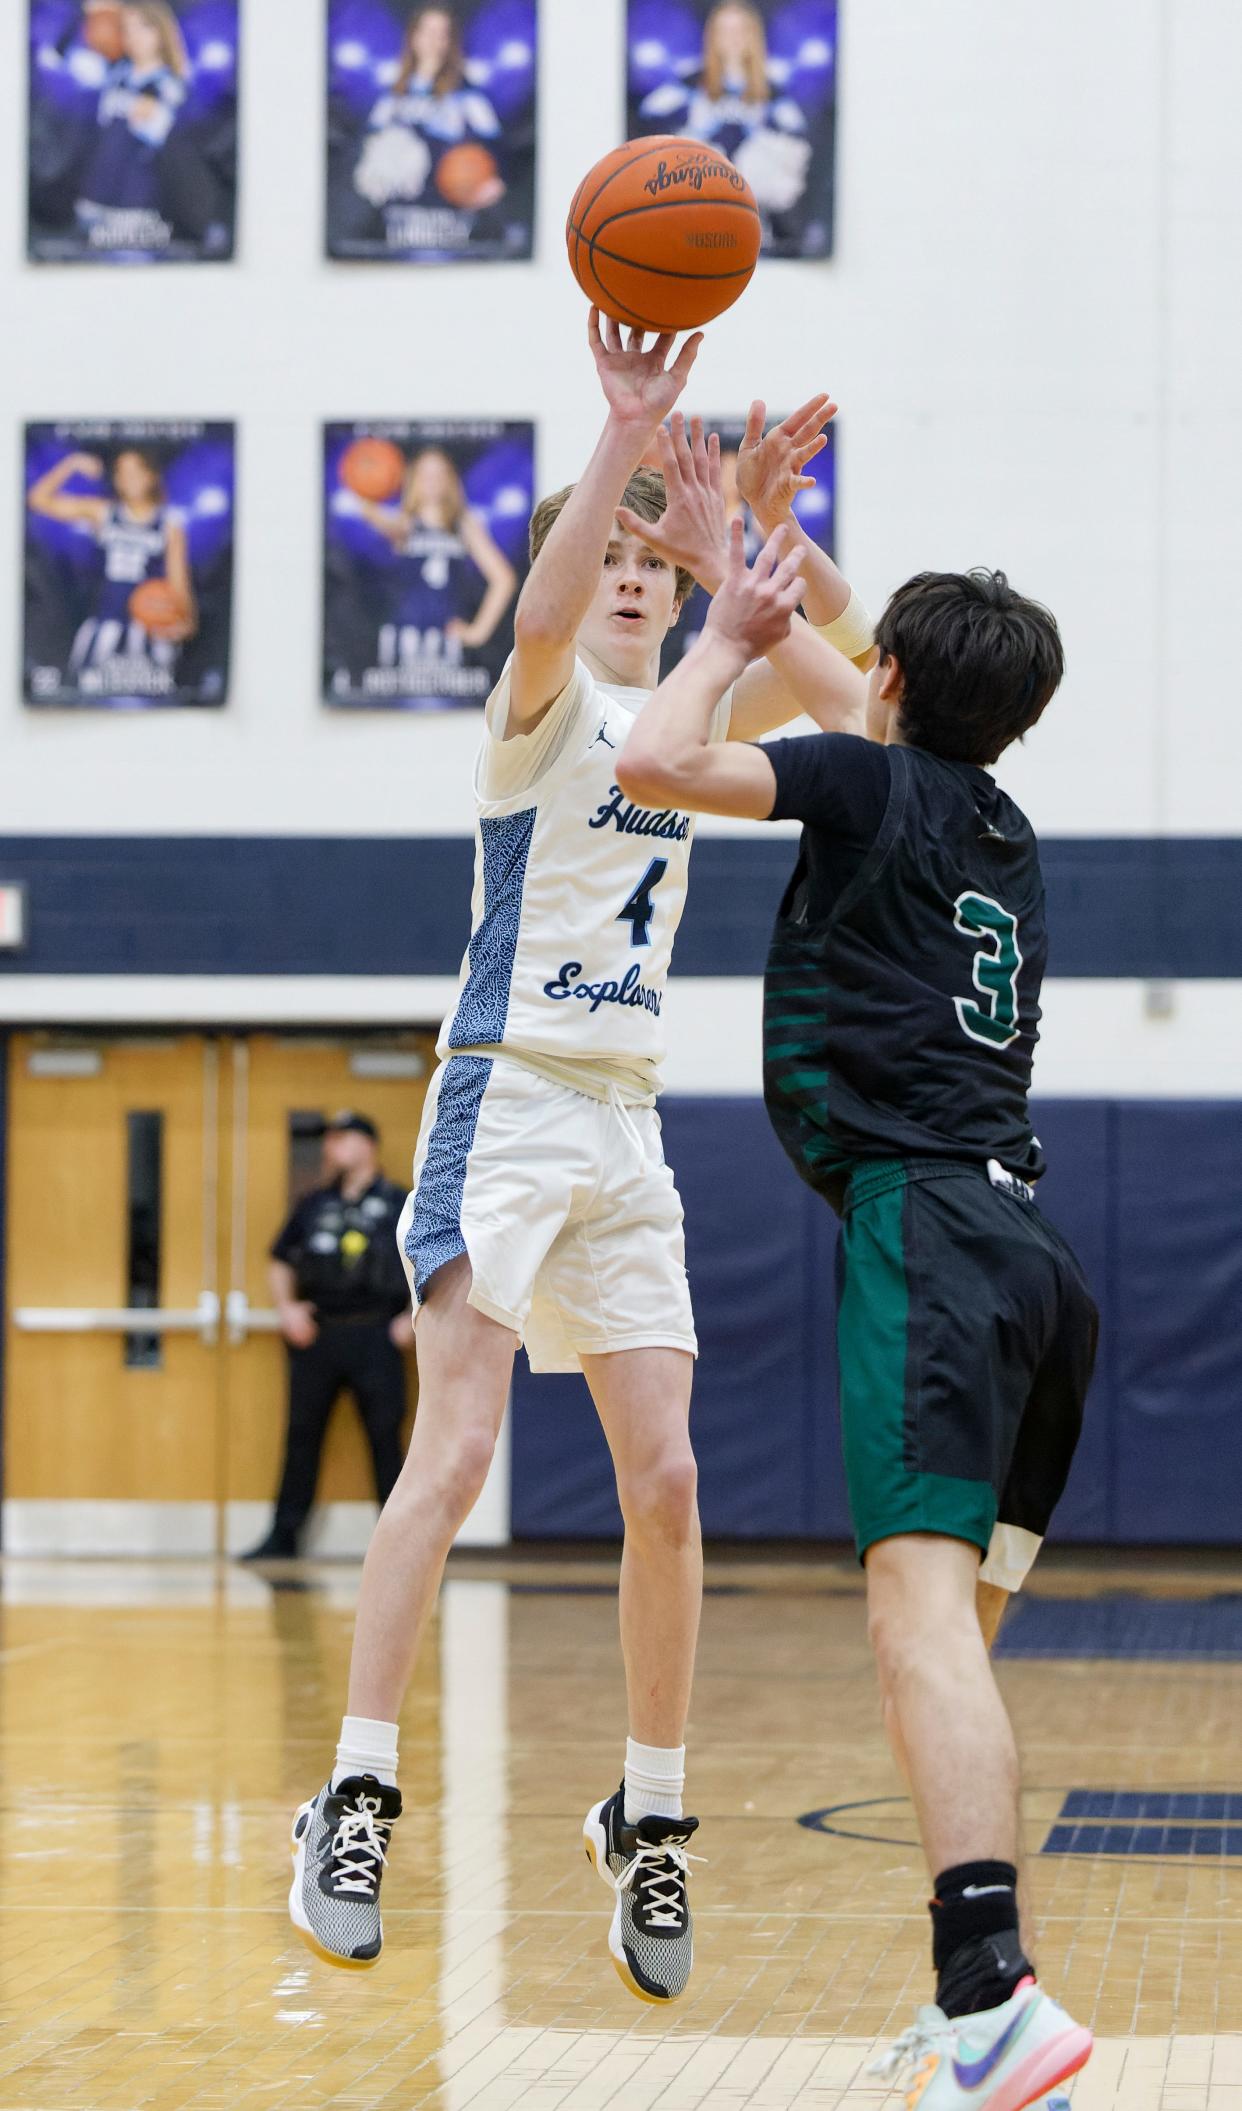 Hudson's Fritz Trautman hits a series a three-pointer over Nordonia's Trevor Turnbull during a game earlier this season.